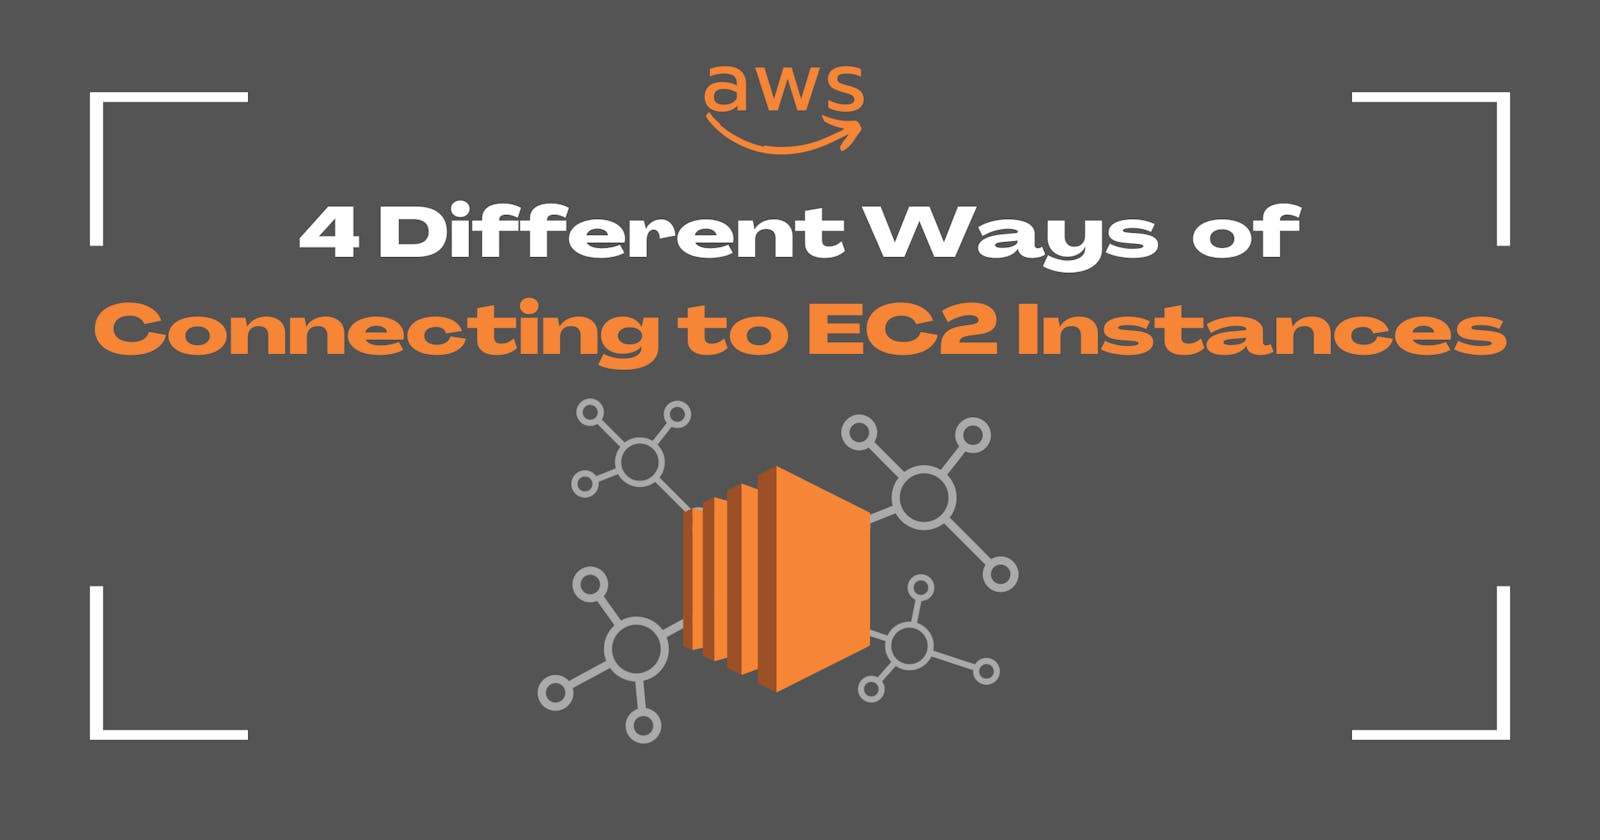 4 Different Ways of Connecting to EC2 Instances